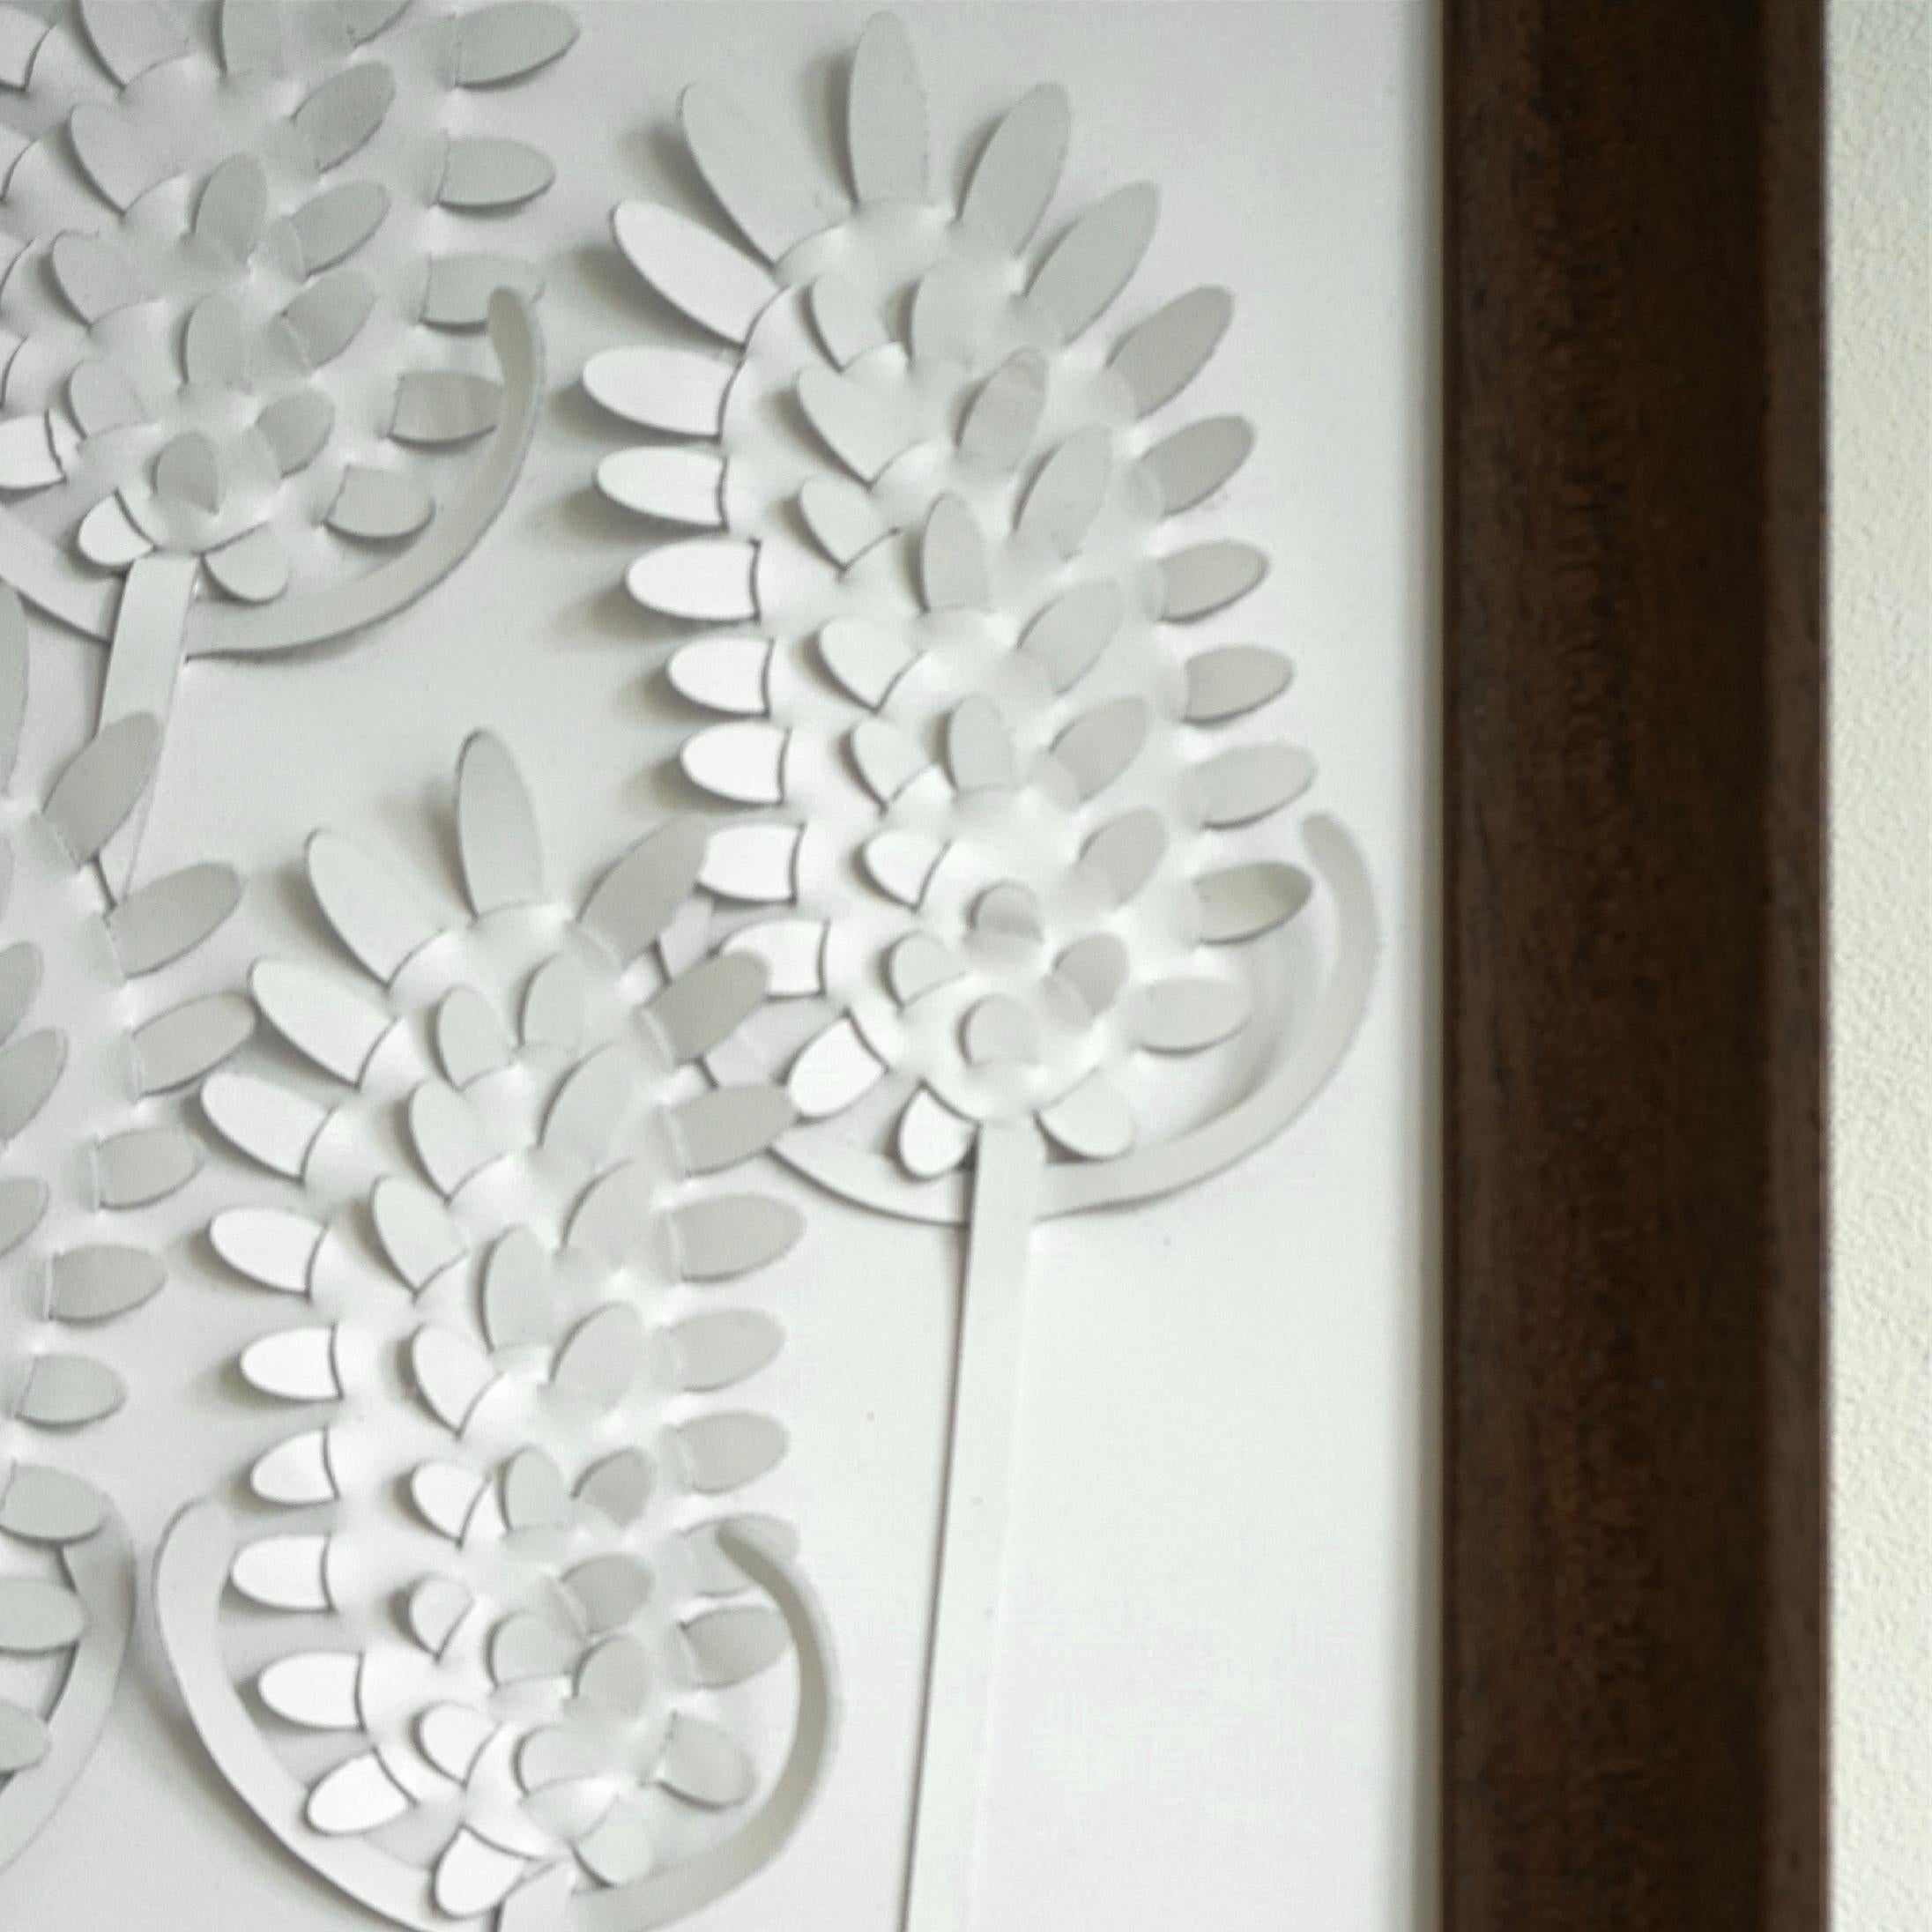 Hand-Crafted Teasel a Piece of 3D Sculptural White Leather Wall Art For Sale